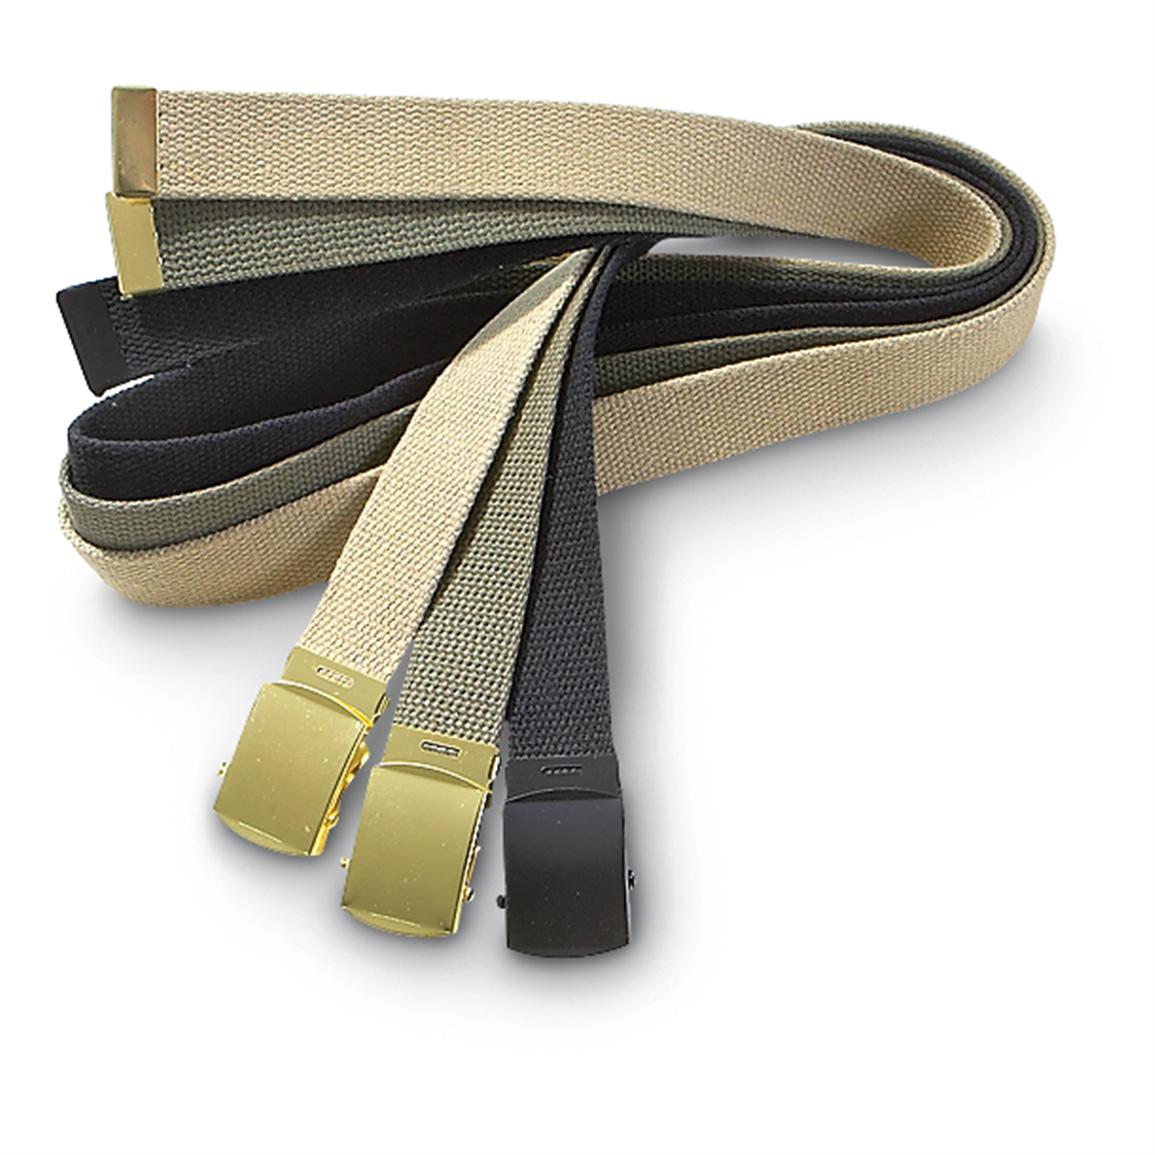 Military Style Web Belts with Roller Buckles